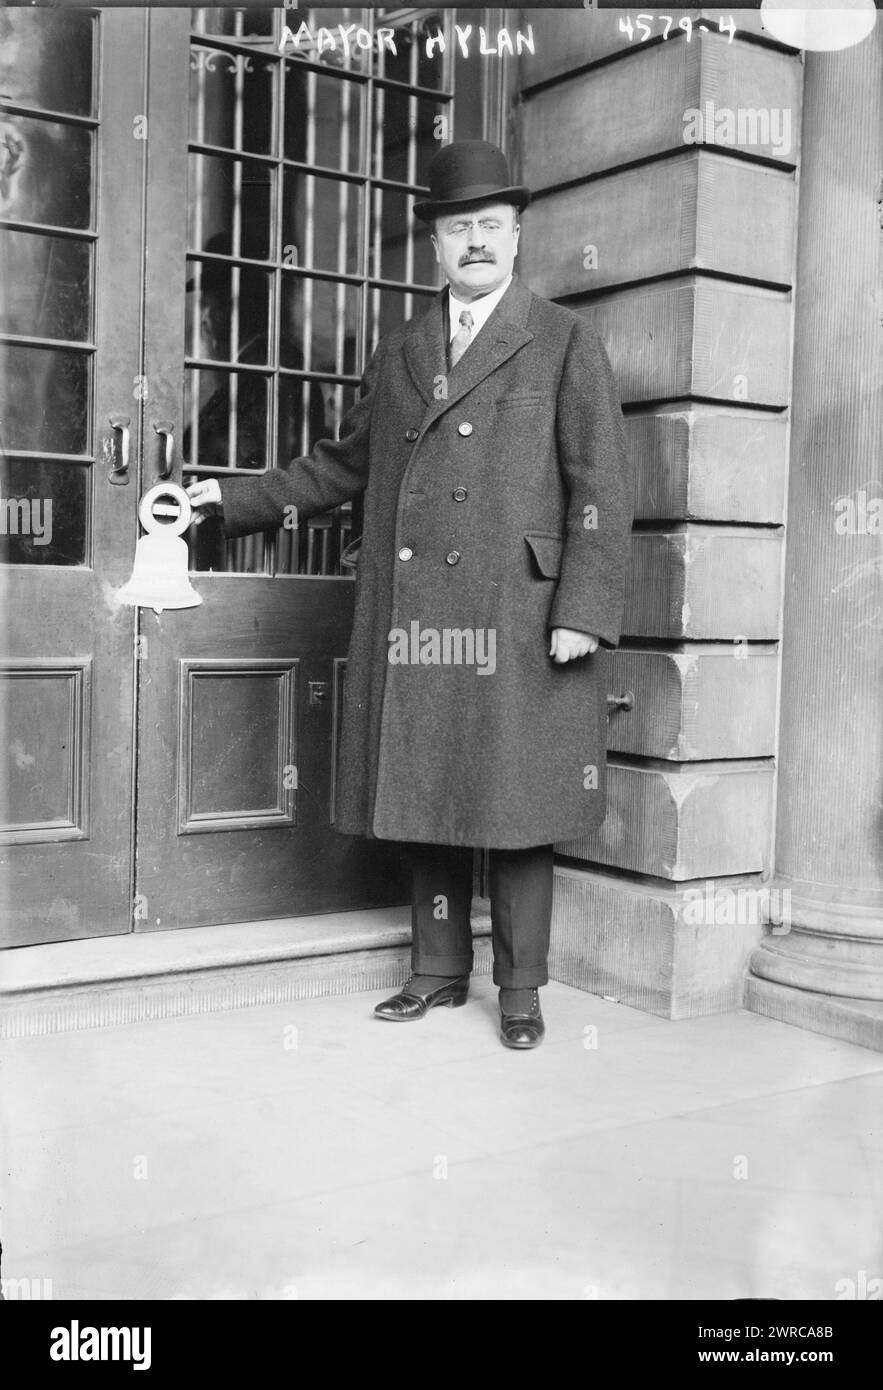 Mayor Hylan, Photograph shows New York City's Mayor John Francis Hylan (1868-1936) with advertisement for government bonds from Third Liberty Loan as a Liberty bell-shaped cut-out hanging from a doorknob., between ca. 1915 and ca. 1920, World War, 1914-1918, Glass negatives, 1 negative: glass Stock Photo